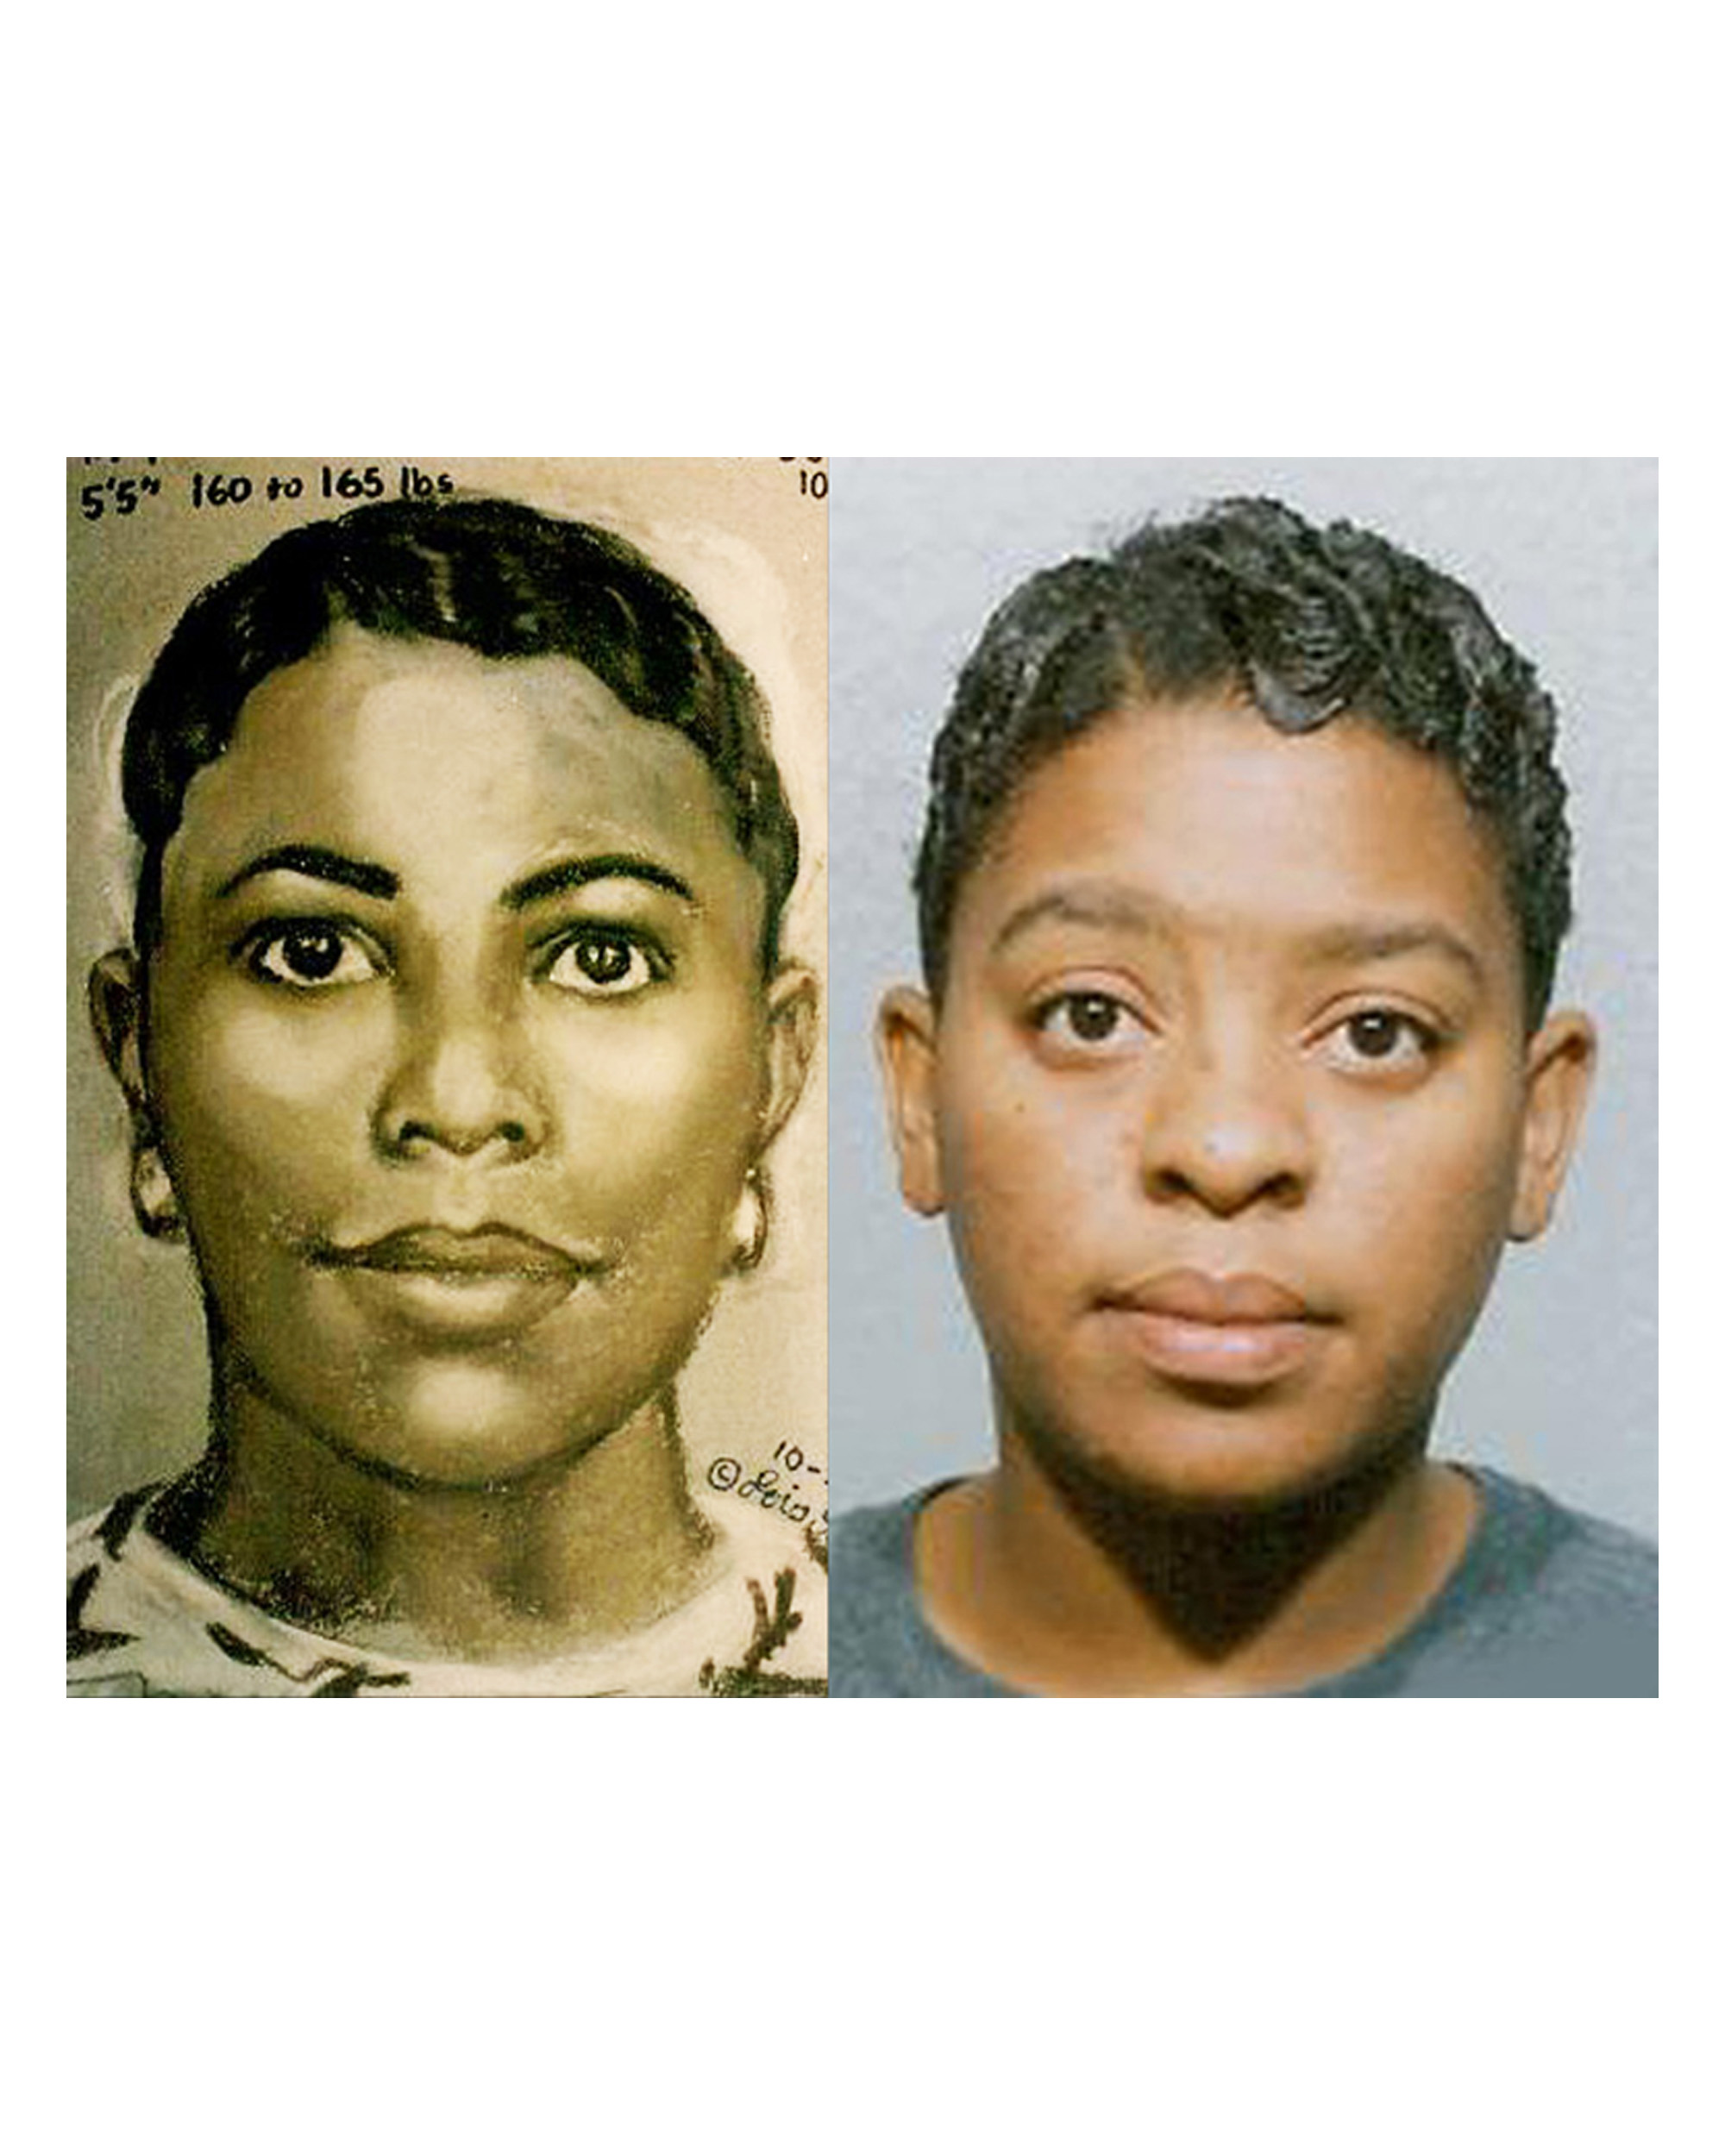 After the kidnapping of a 10-month old child from the maternity ward, this sketch led to the arrest of the woman  on the right. Image courtesy of Lois Gibson.